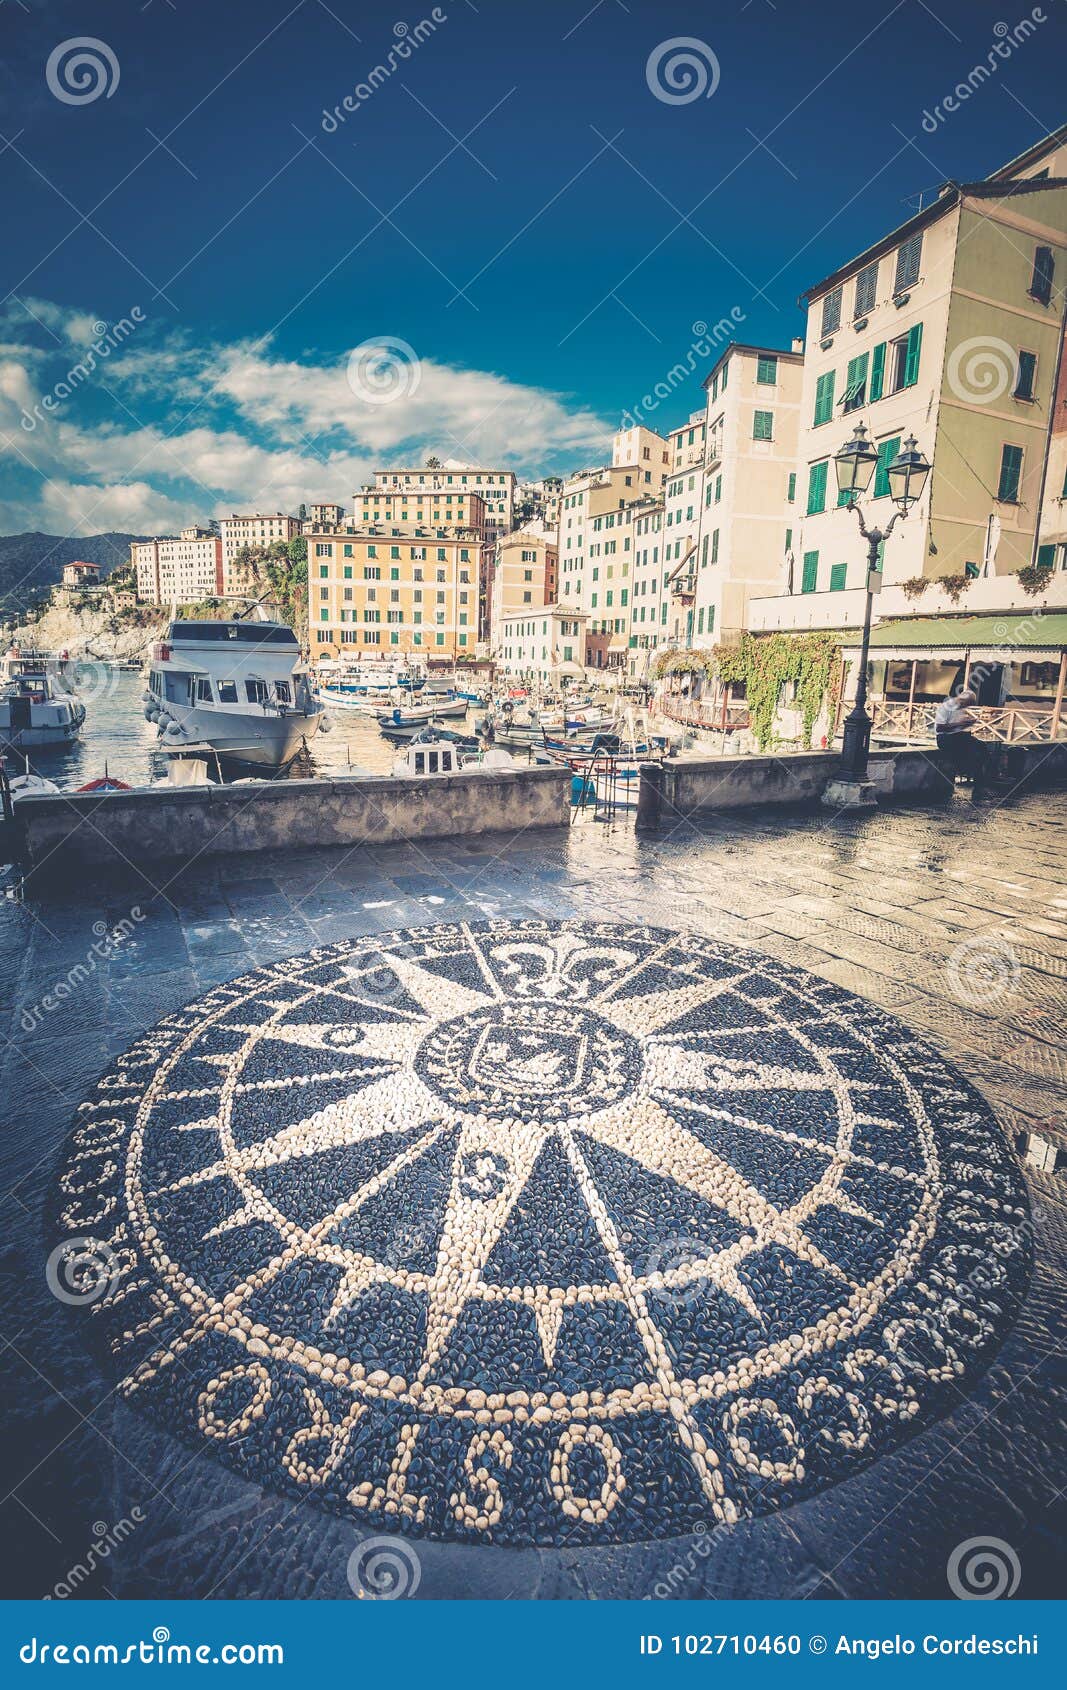 compass rose. windrose mosaic on the road in camogli, italian city